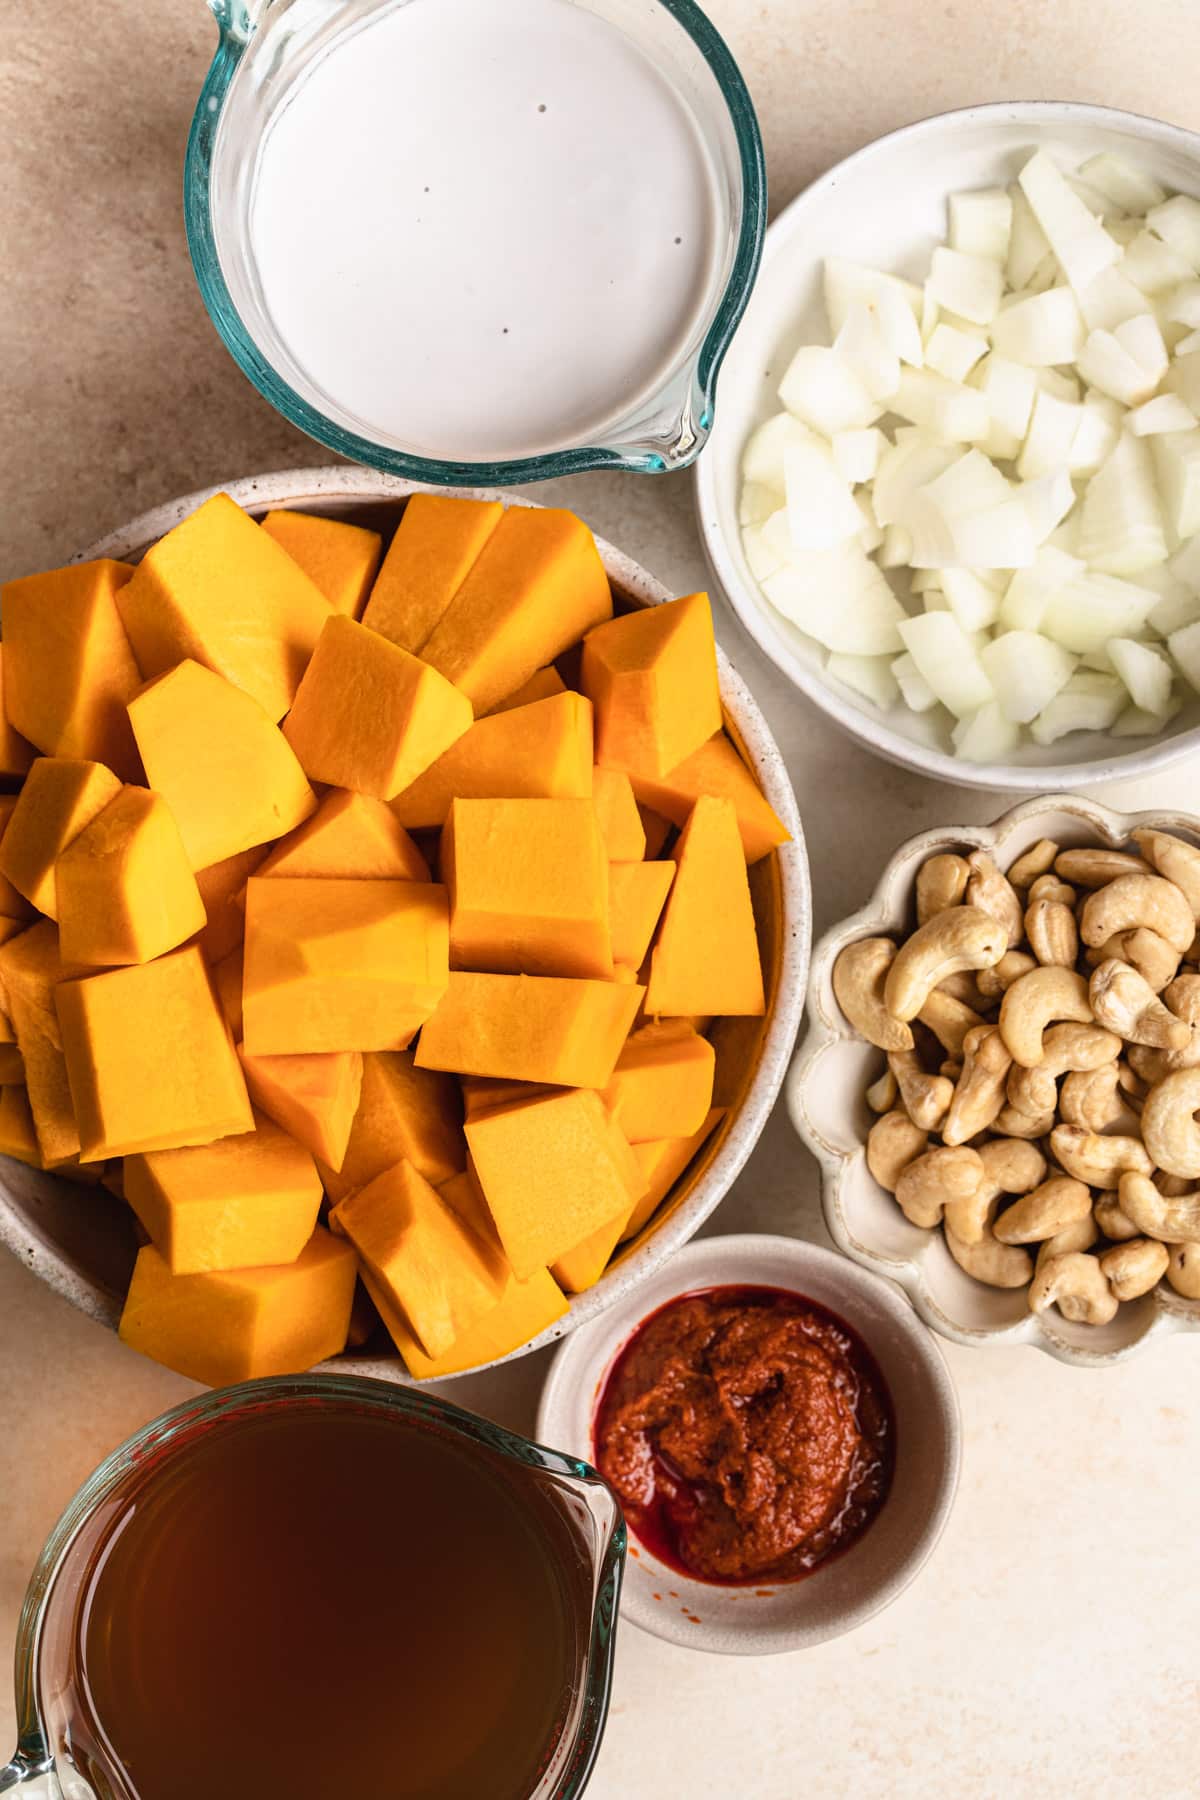 Ingredients for spicy pumpkin soup with coconut milk displayed in bowls on a peach background.